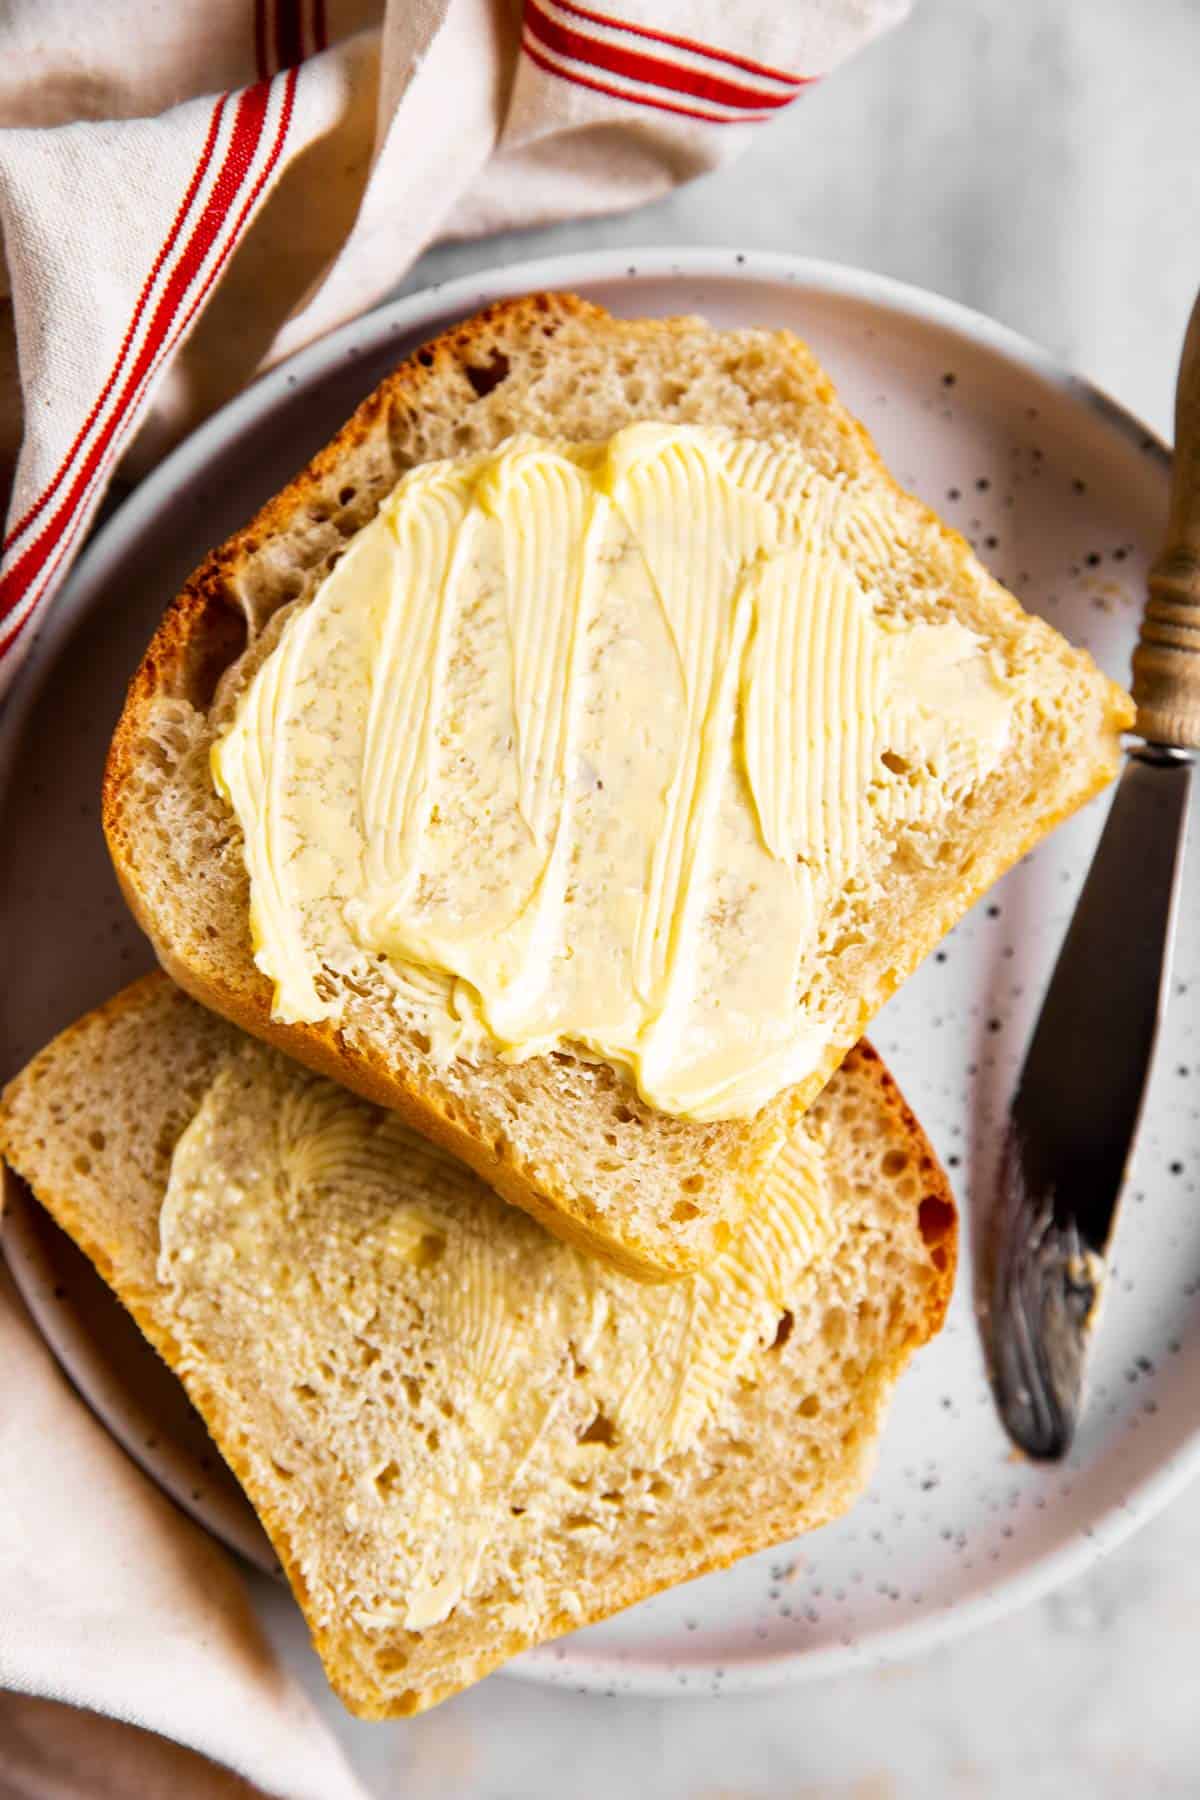 two buttered slices of sourdough bread on white plate next to white and red kitchen towel